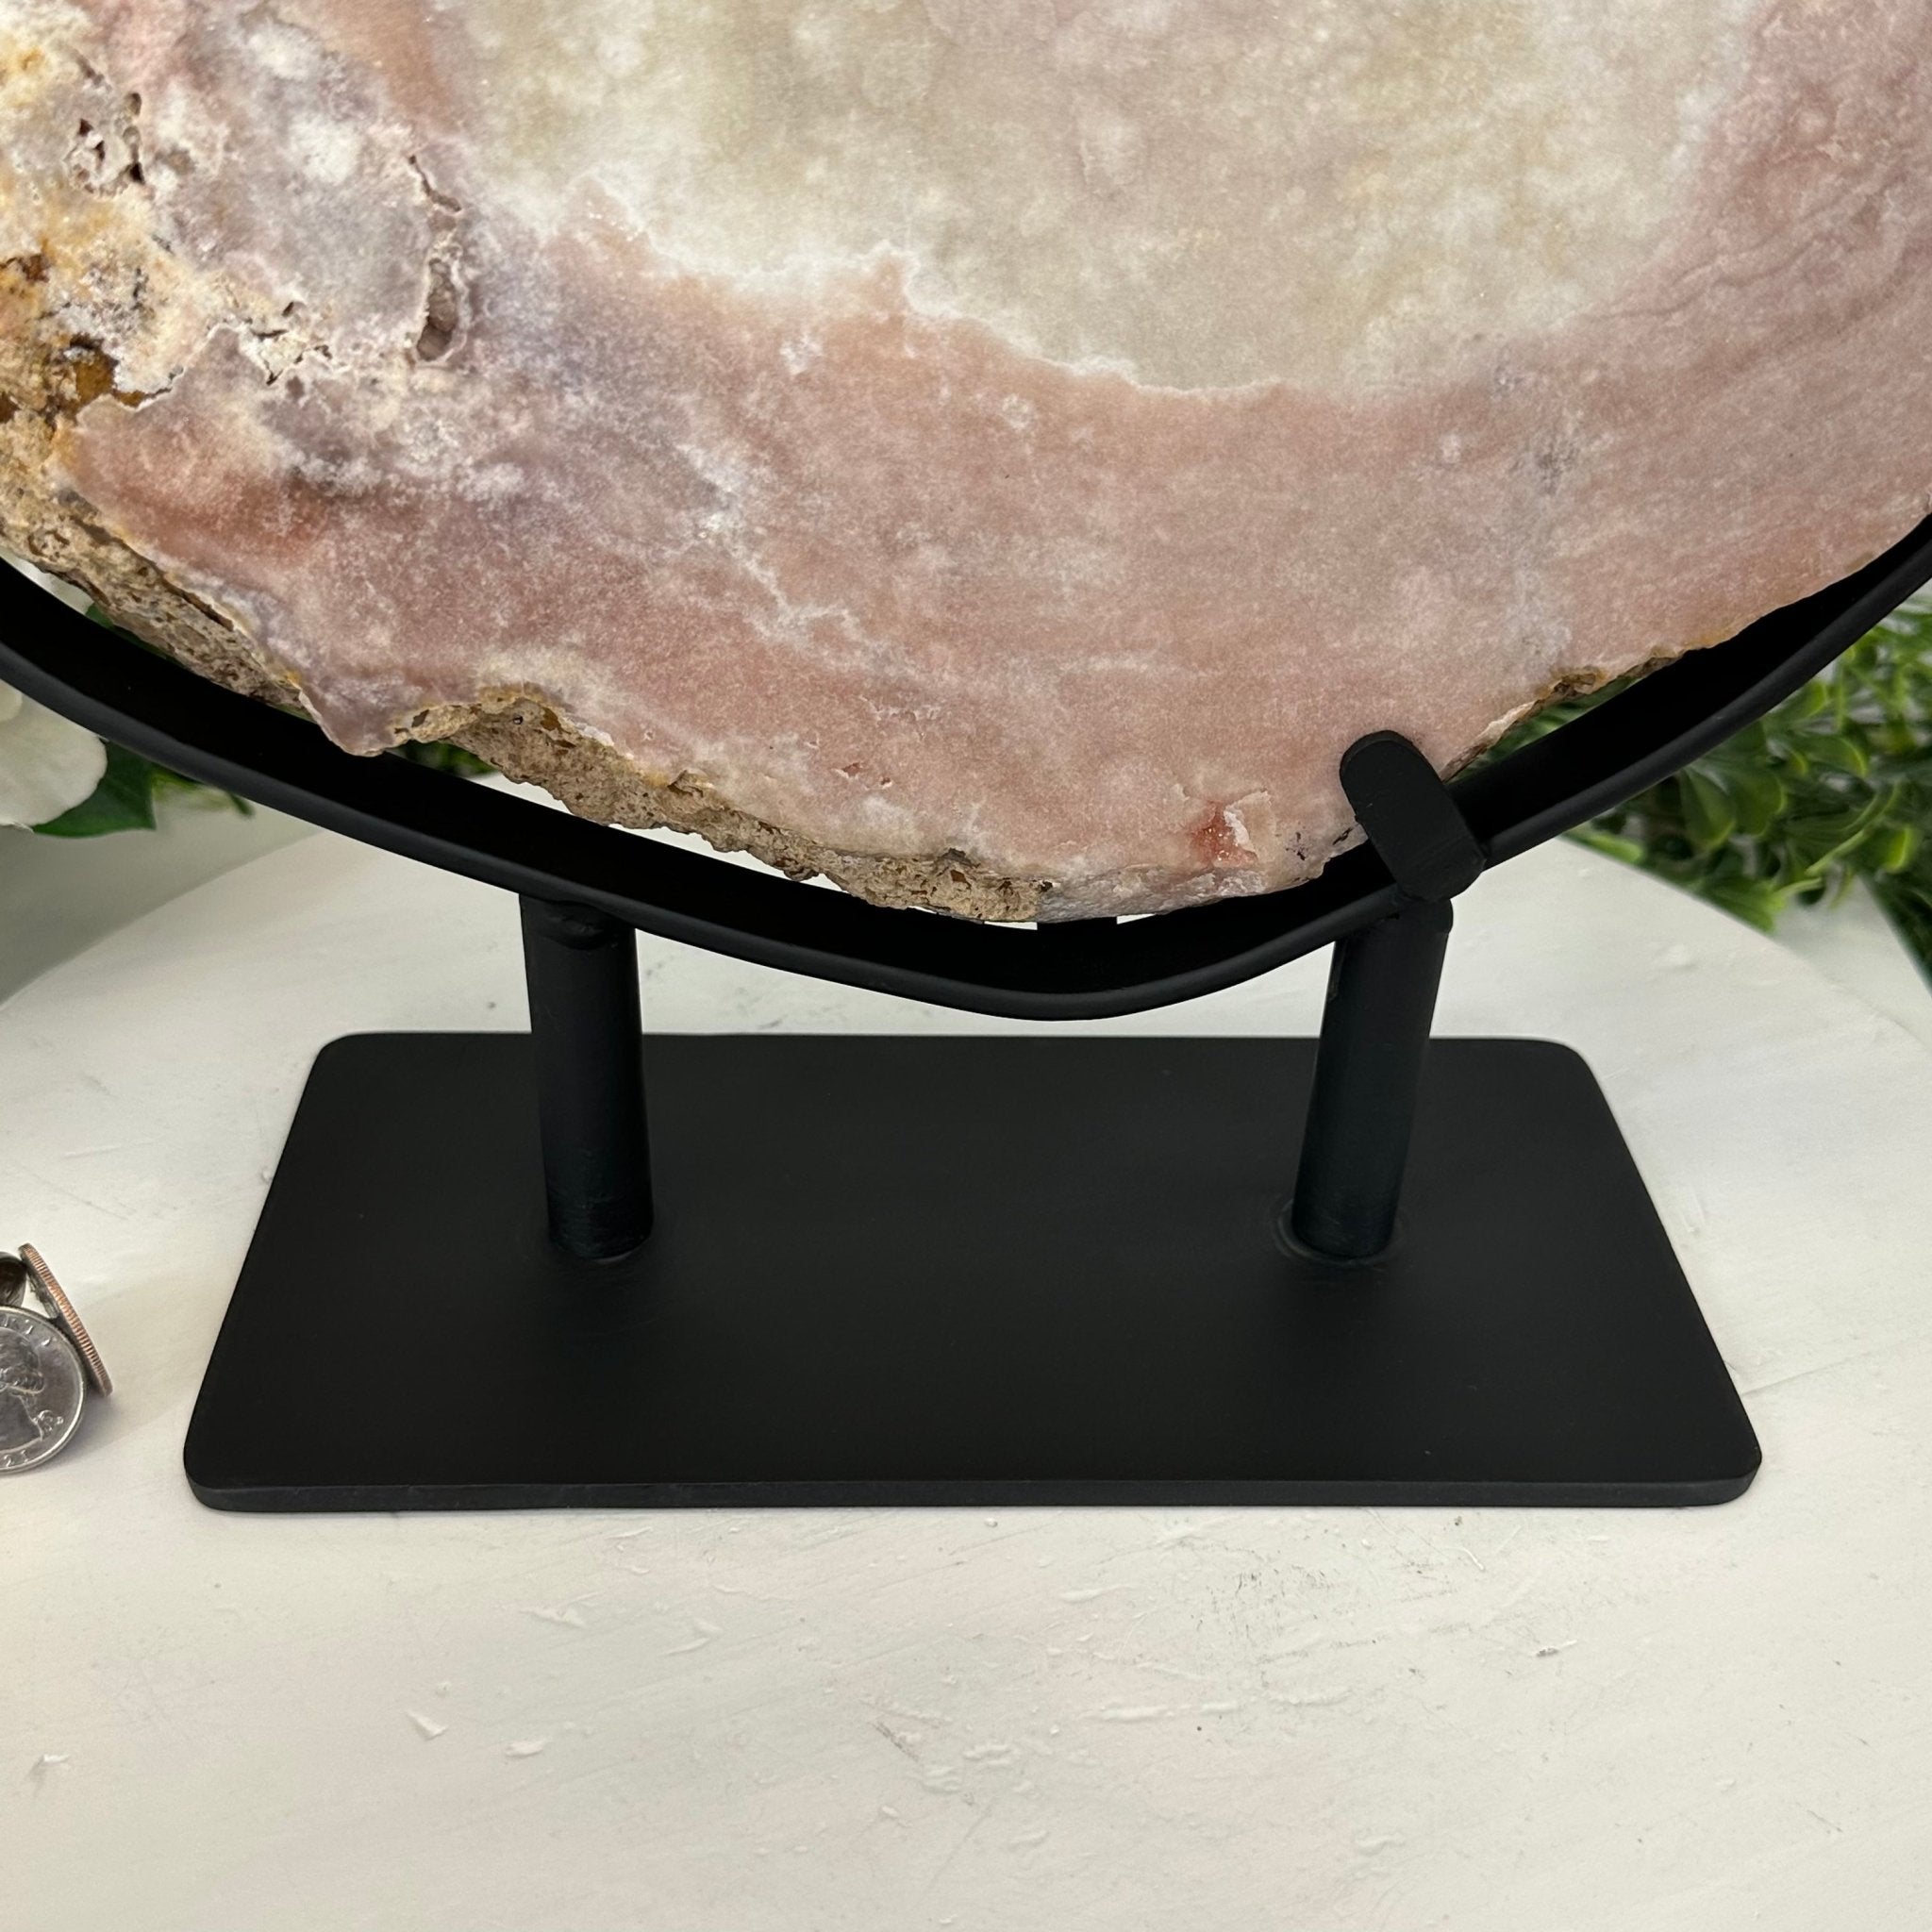 Polished Pink Amethyst Slice on a Stand, 20.1 lbs, 19" Tall #5743-0017 by Brazil Gems - Brazil GemsBrazil GemsPolished Pink Amethyst Slice on a Stand, 20.1 lbs, 19" Tall #5743-0017 by Brazil GemsSlices on Fixed Bases5743-0017